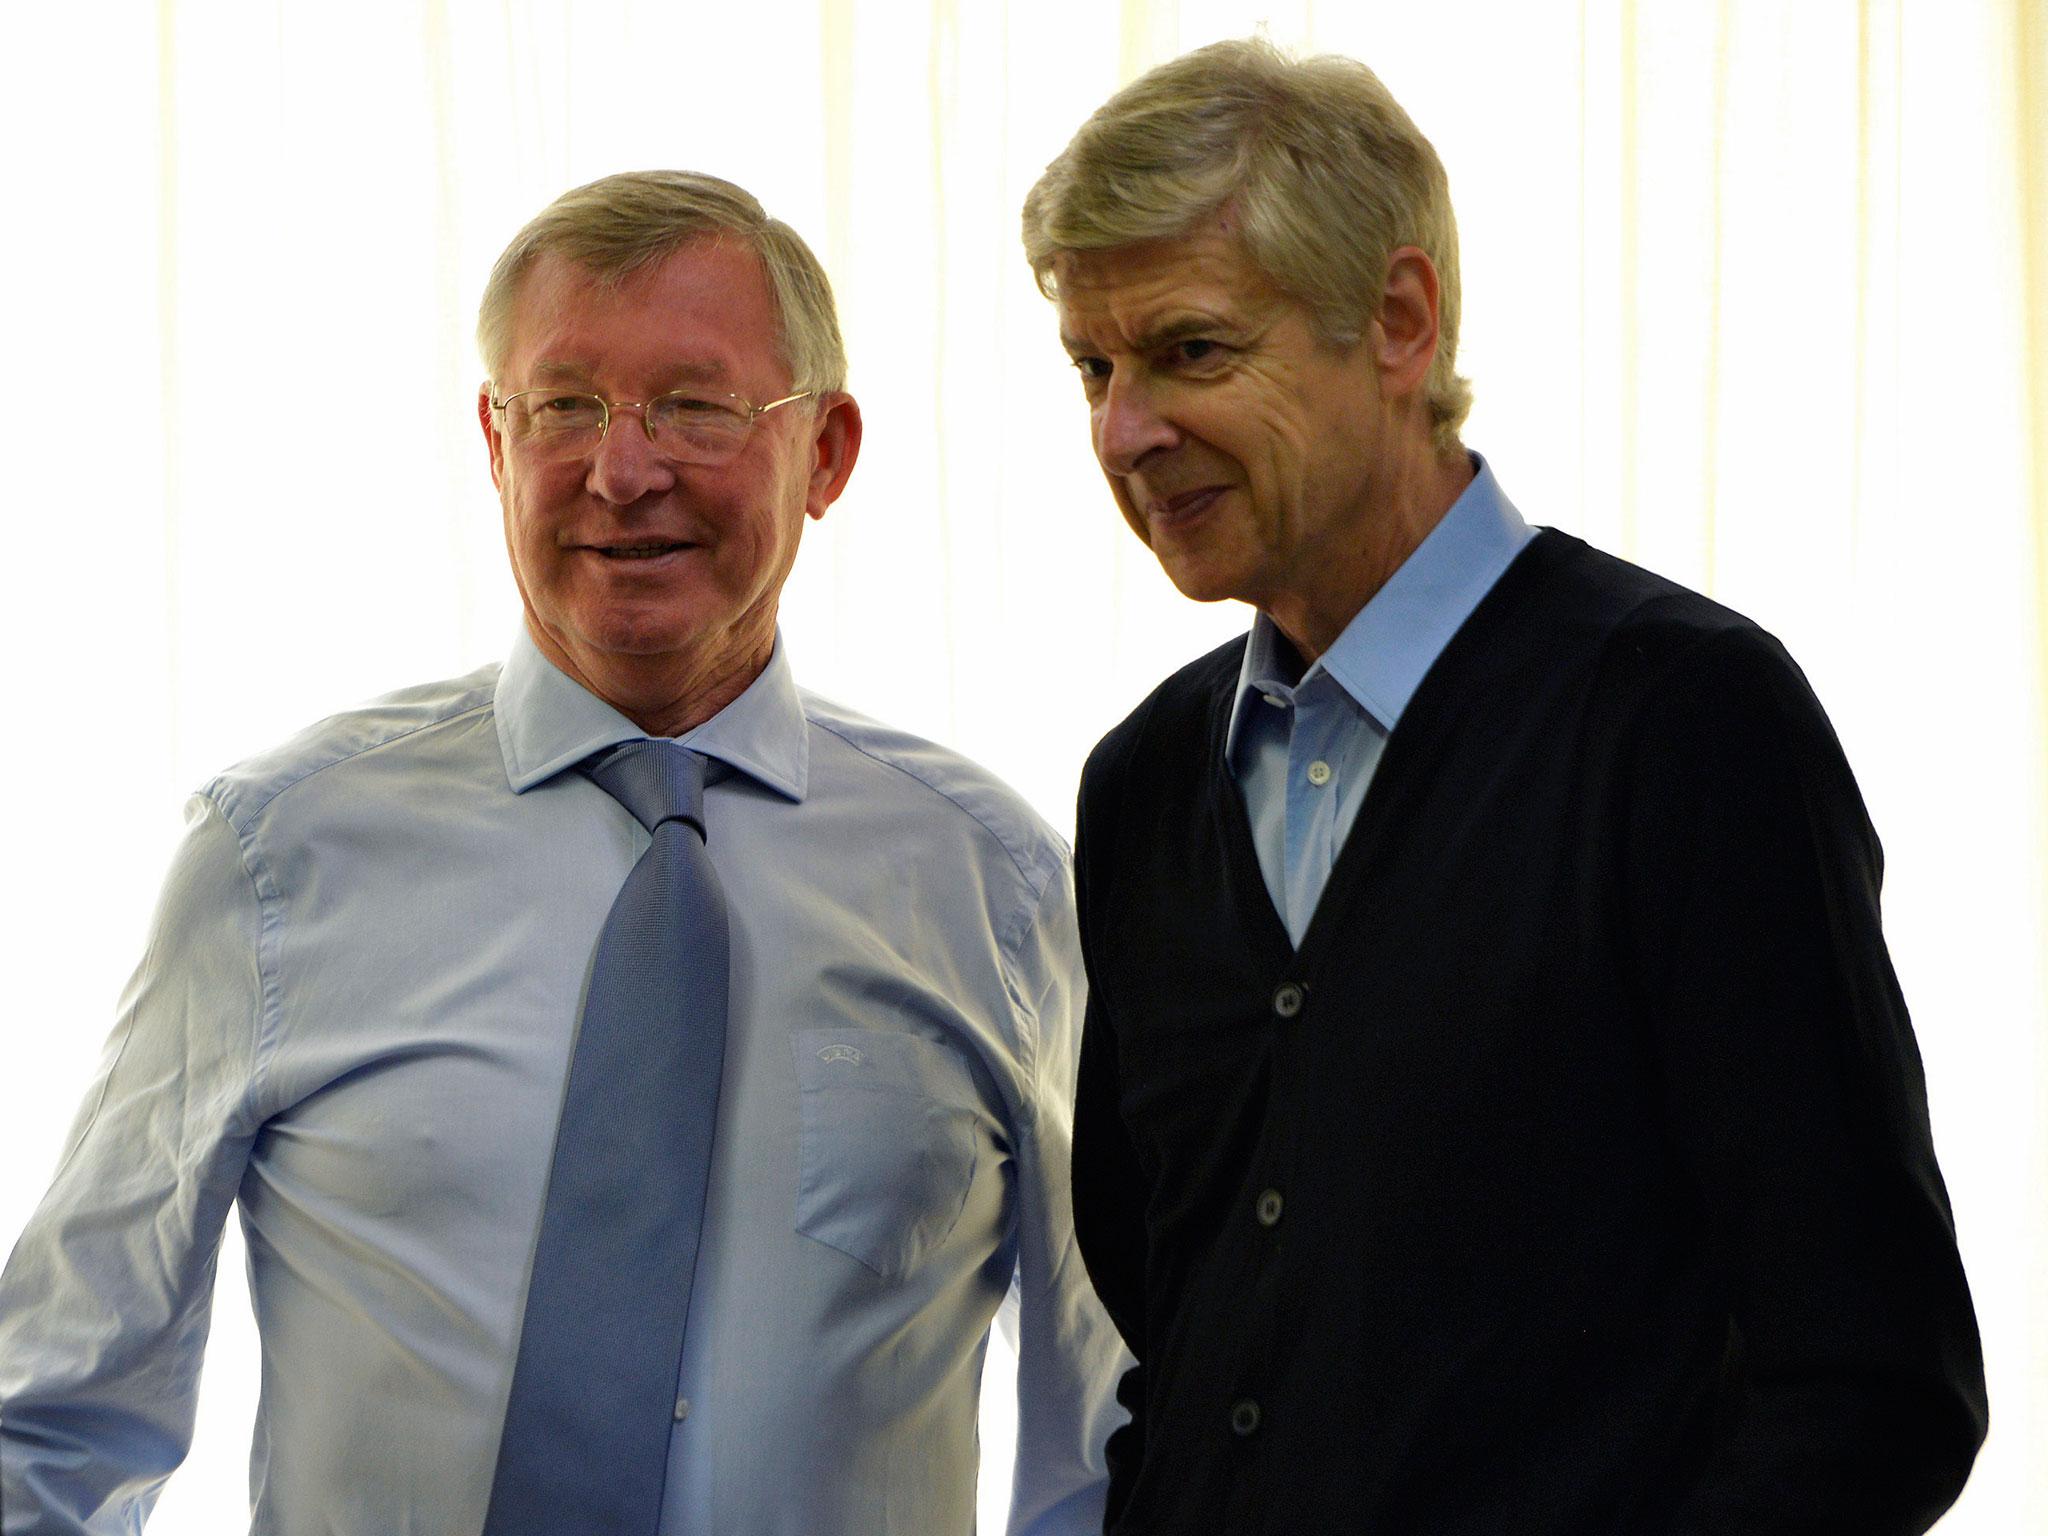 Arsene Wenger won't emulate Sir Alex Ferguson's 26-year reign even though he could remain Arsenal manager